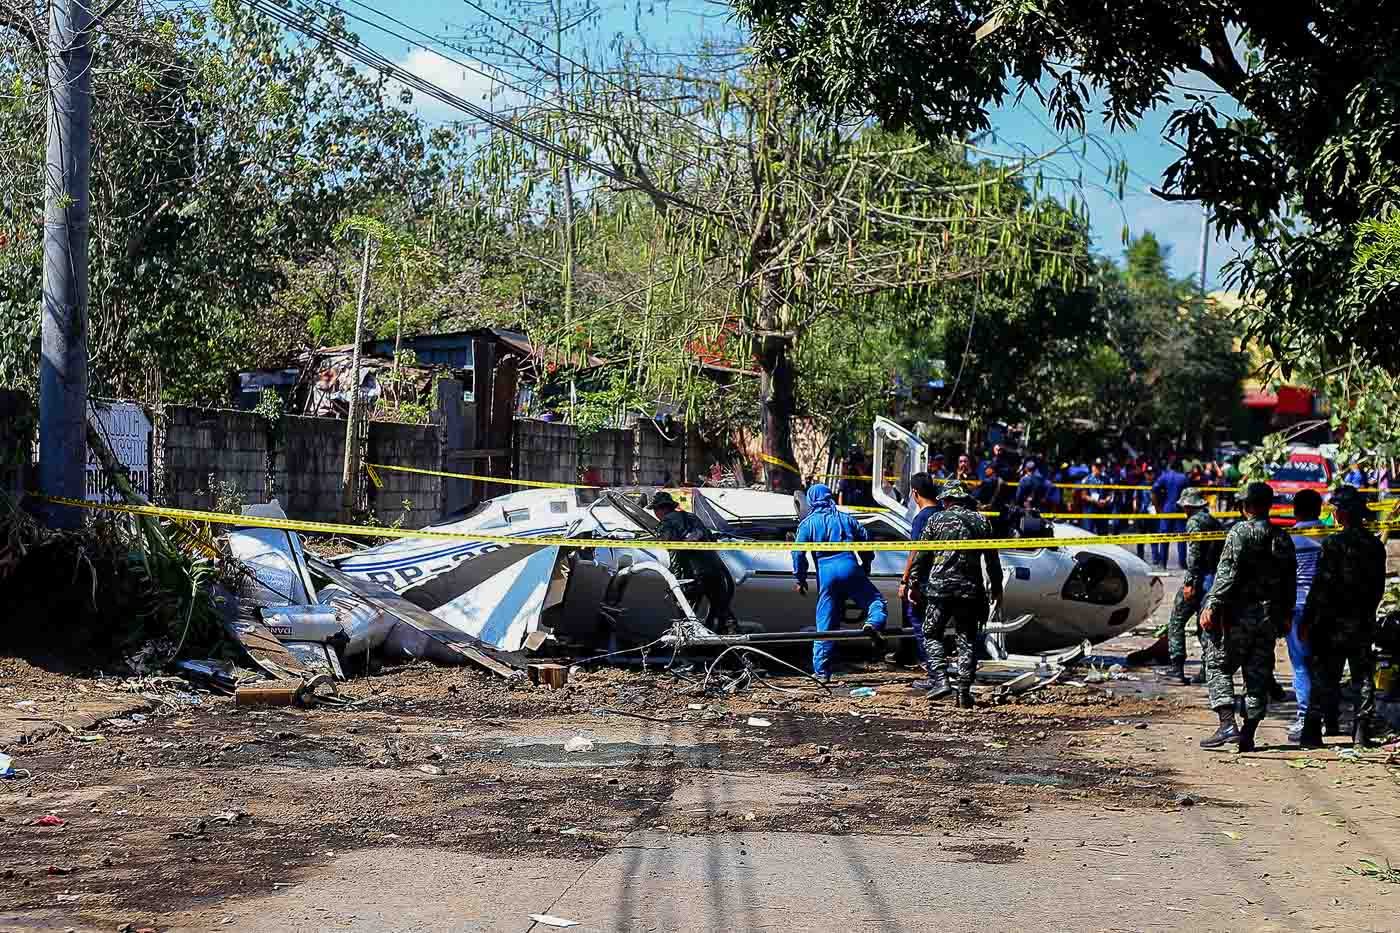 PNP chief Gamboa: Laguna helicopter crash an ‘accident’